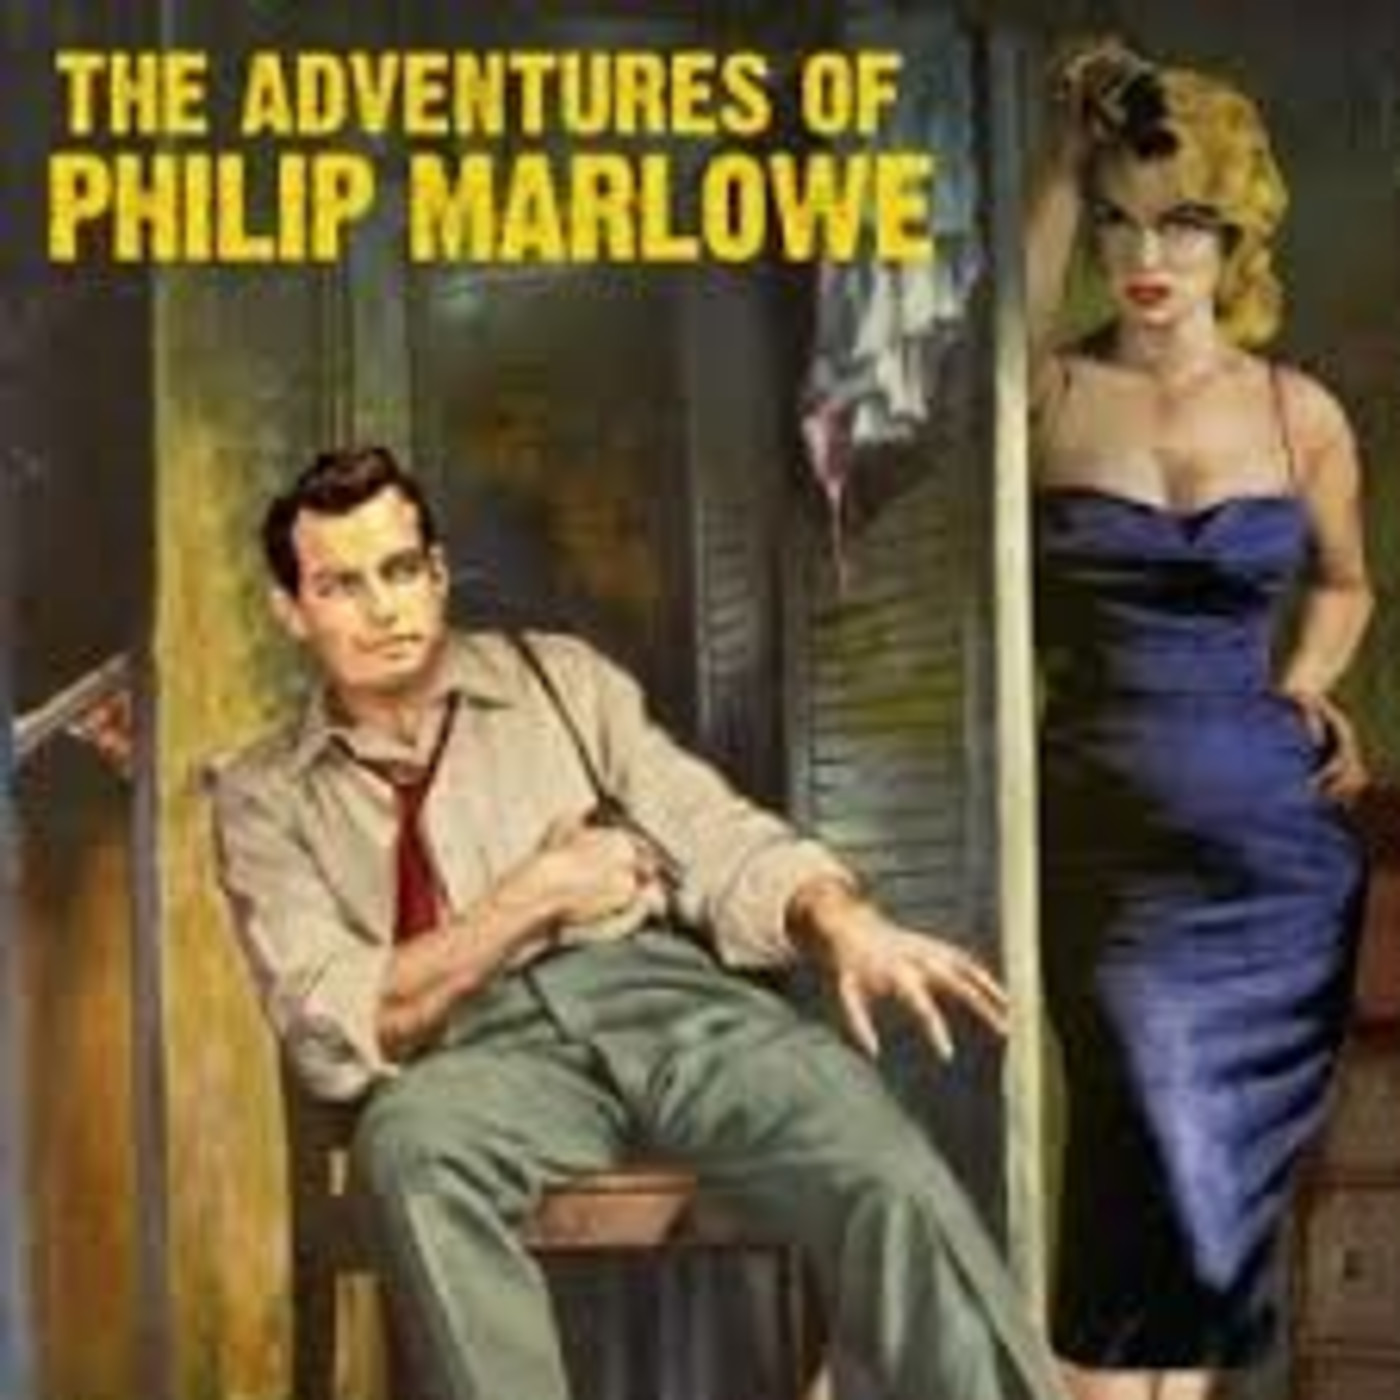 The Adventures of Philip Marlowe - The Collector’s Item